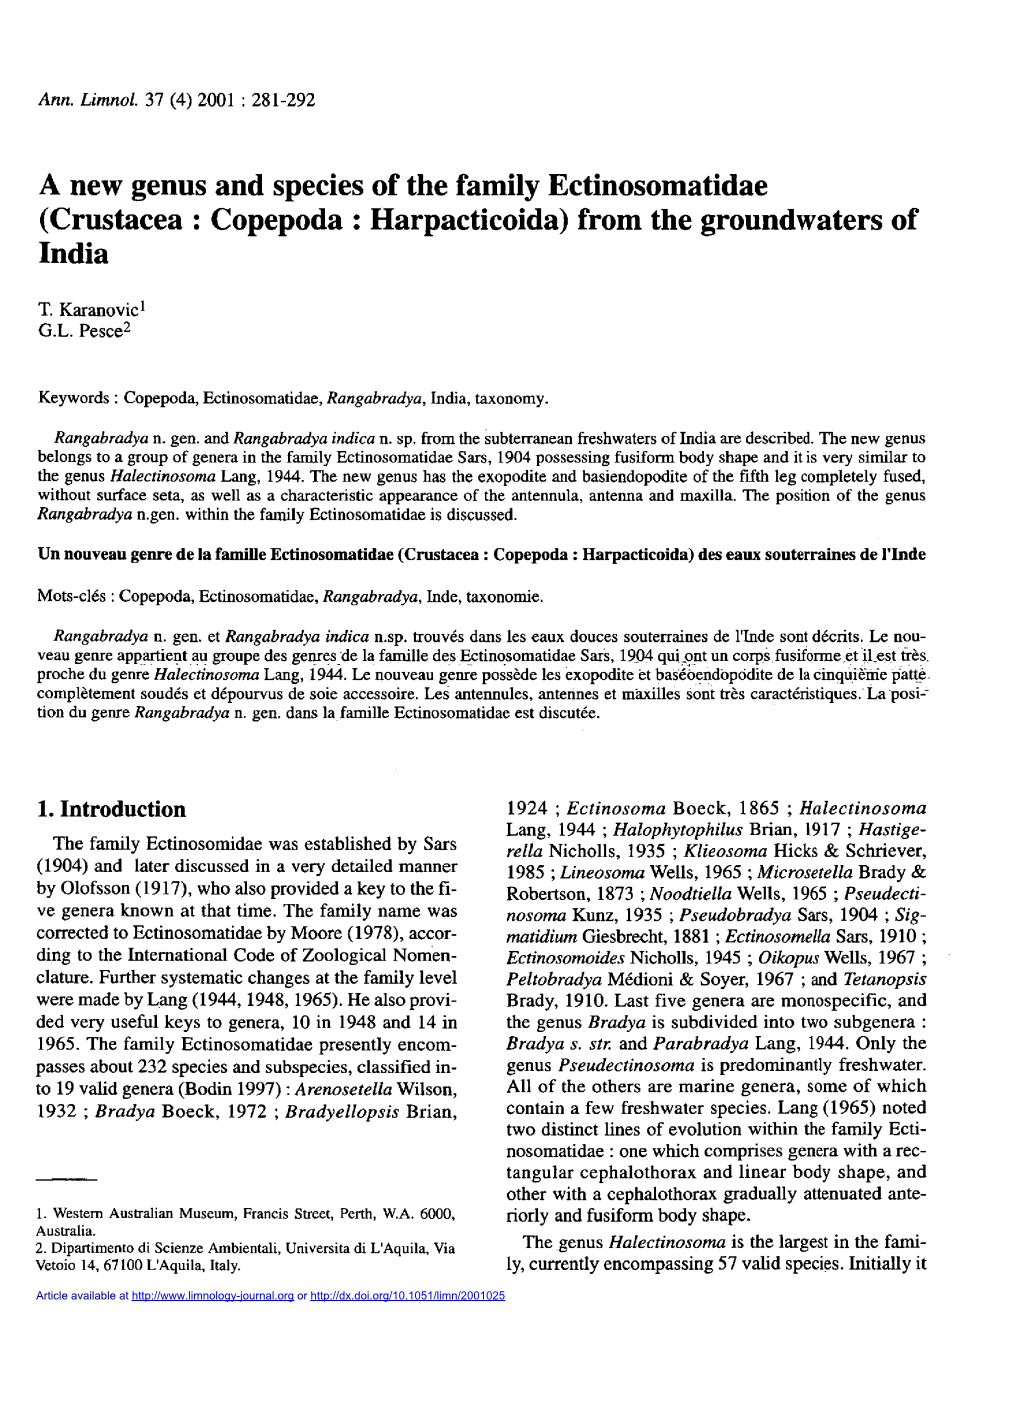 A New Genus and Species of the Family Ectinosomatidae (Crustacea : Copepoda : Harpacticoida) from the Groundwaters of India